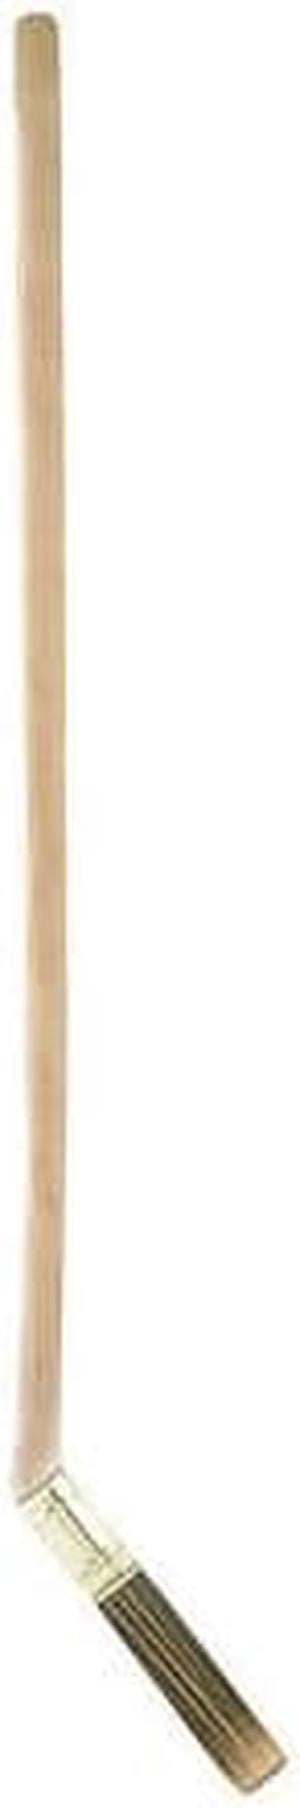 WOOSTER F1843 2" Bent Radiator Paint Brush, Polyester Bristle, Wood Handle